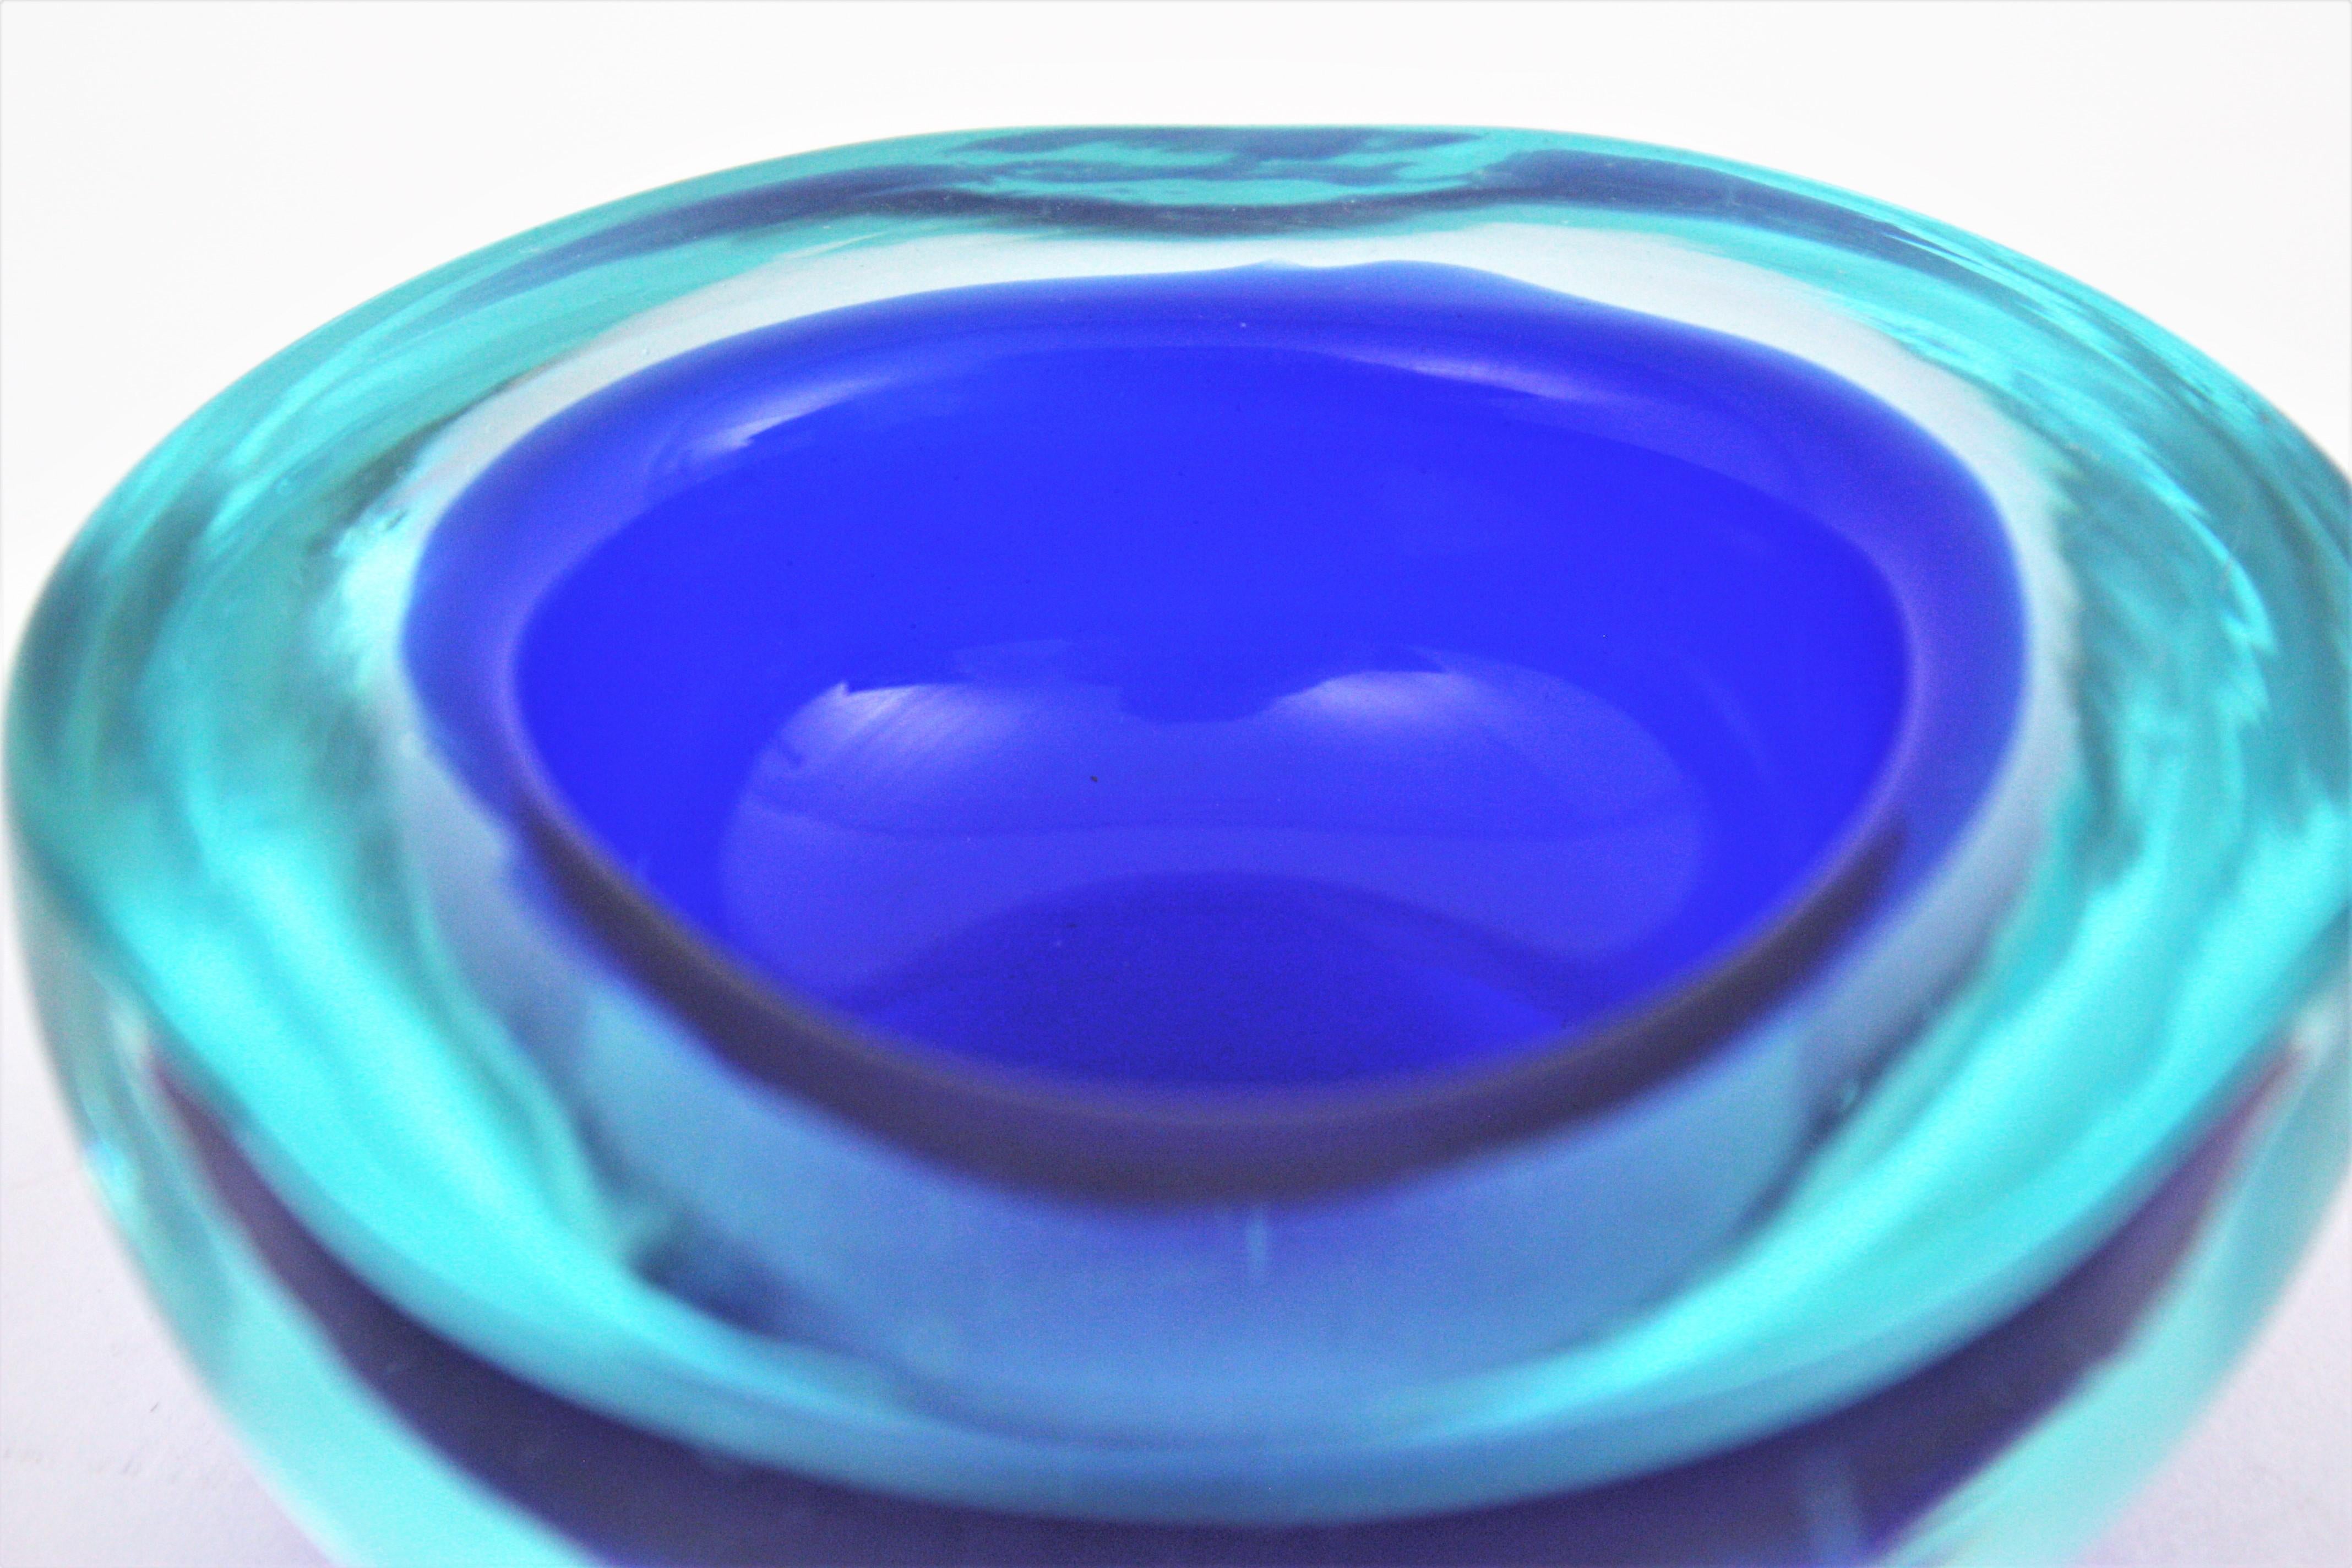 Archimede Seguso Murano Small Sommerso Blue Glass Geode Bowl, 1960s For Sale 2